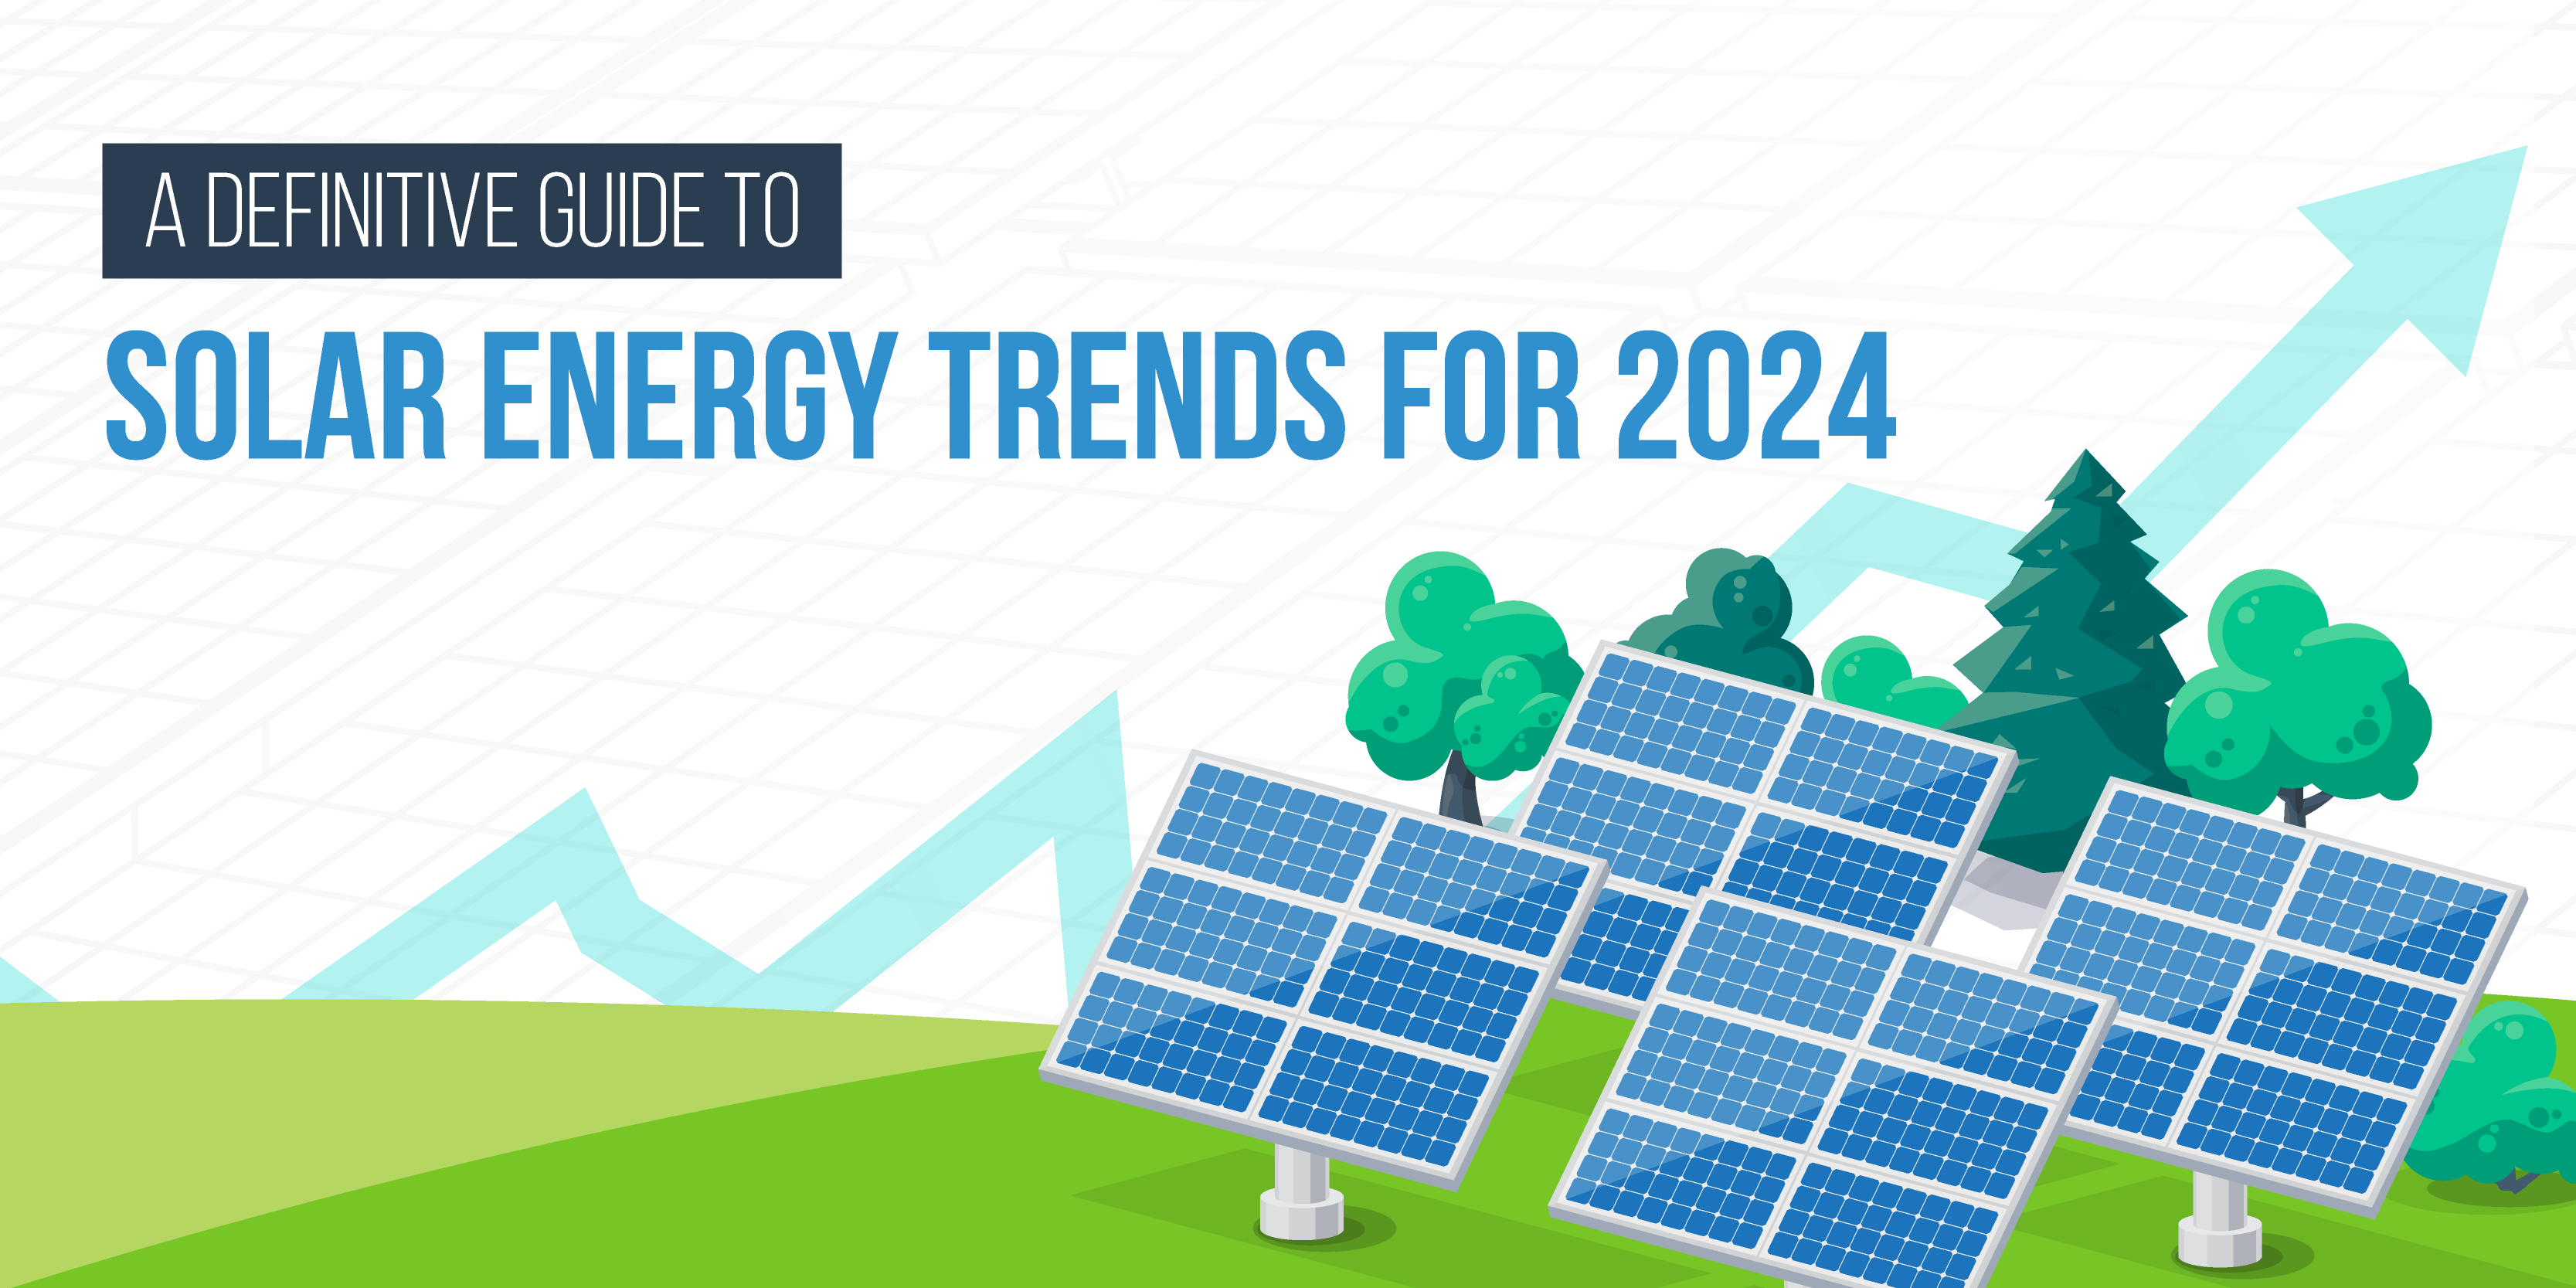 A Definitive Guide to Solar Energy Trends for 2024